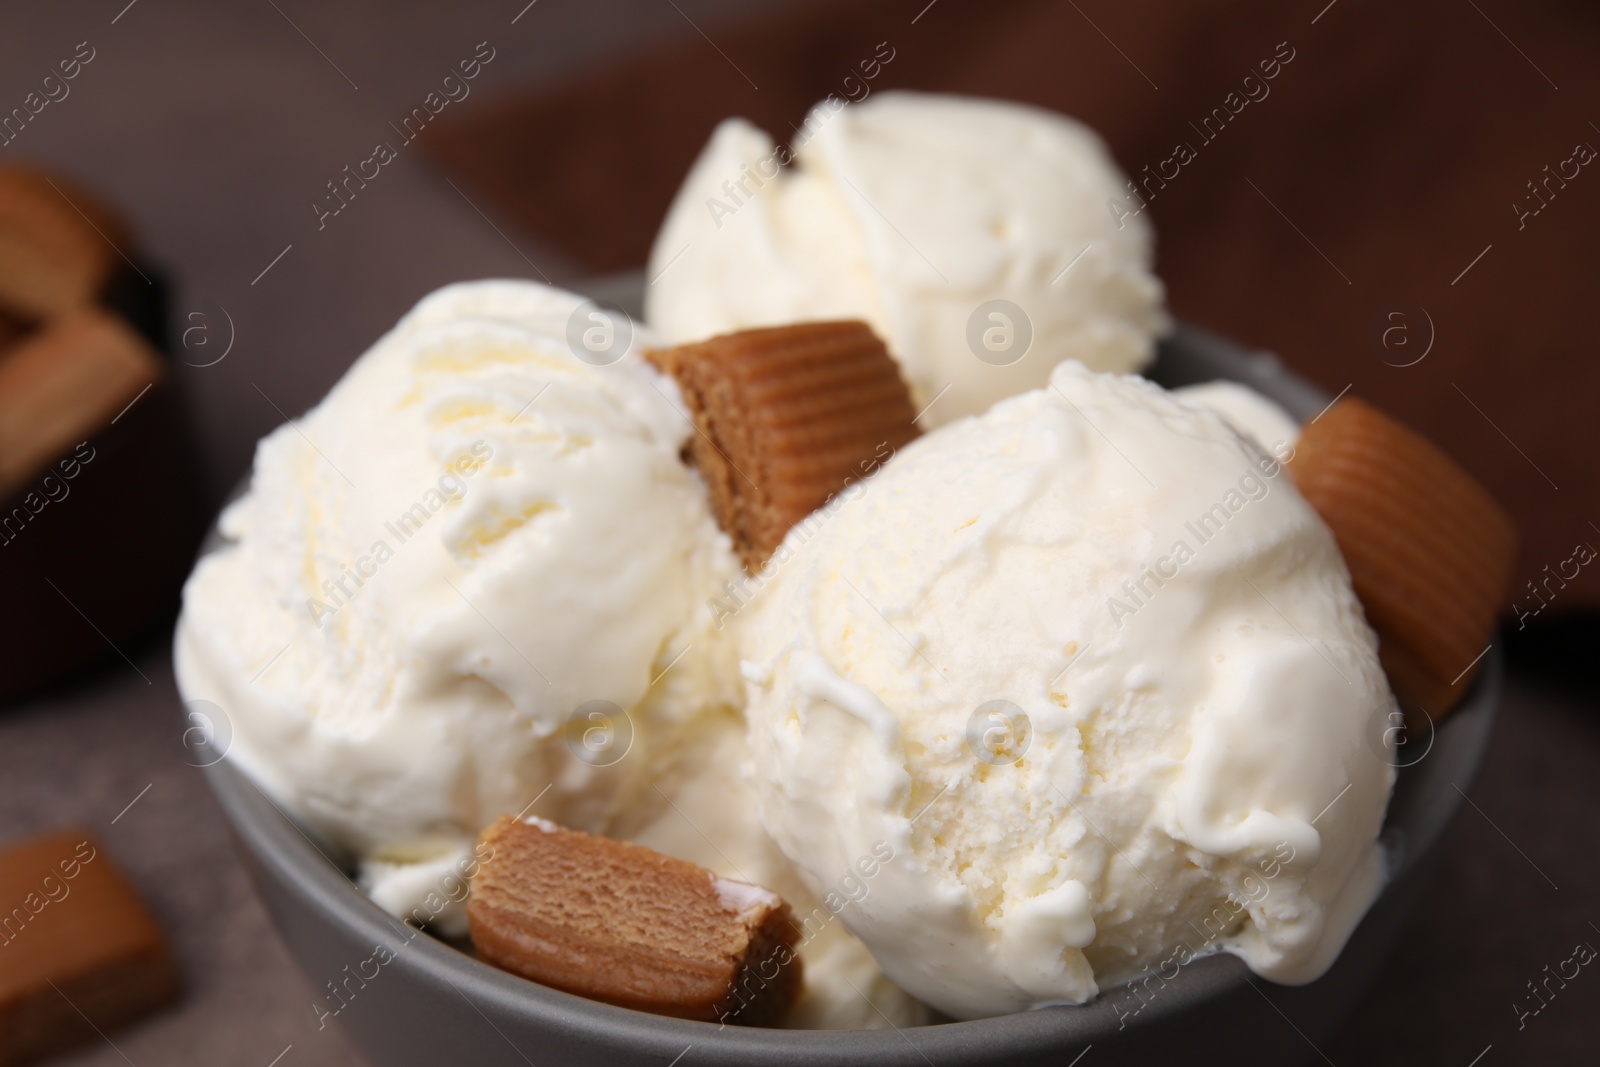 Photo of Scoops of ice cream with caramel candies in bowl on table, closeup